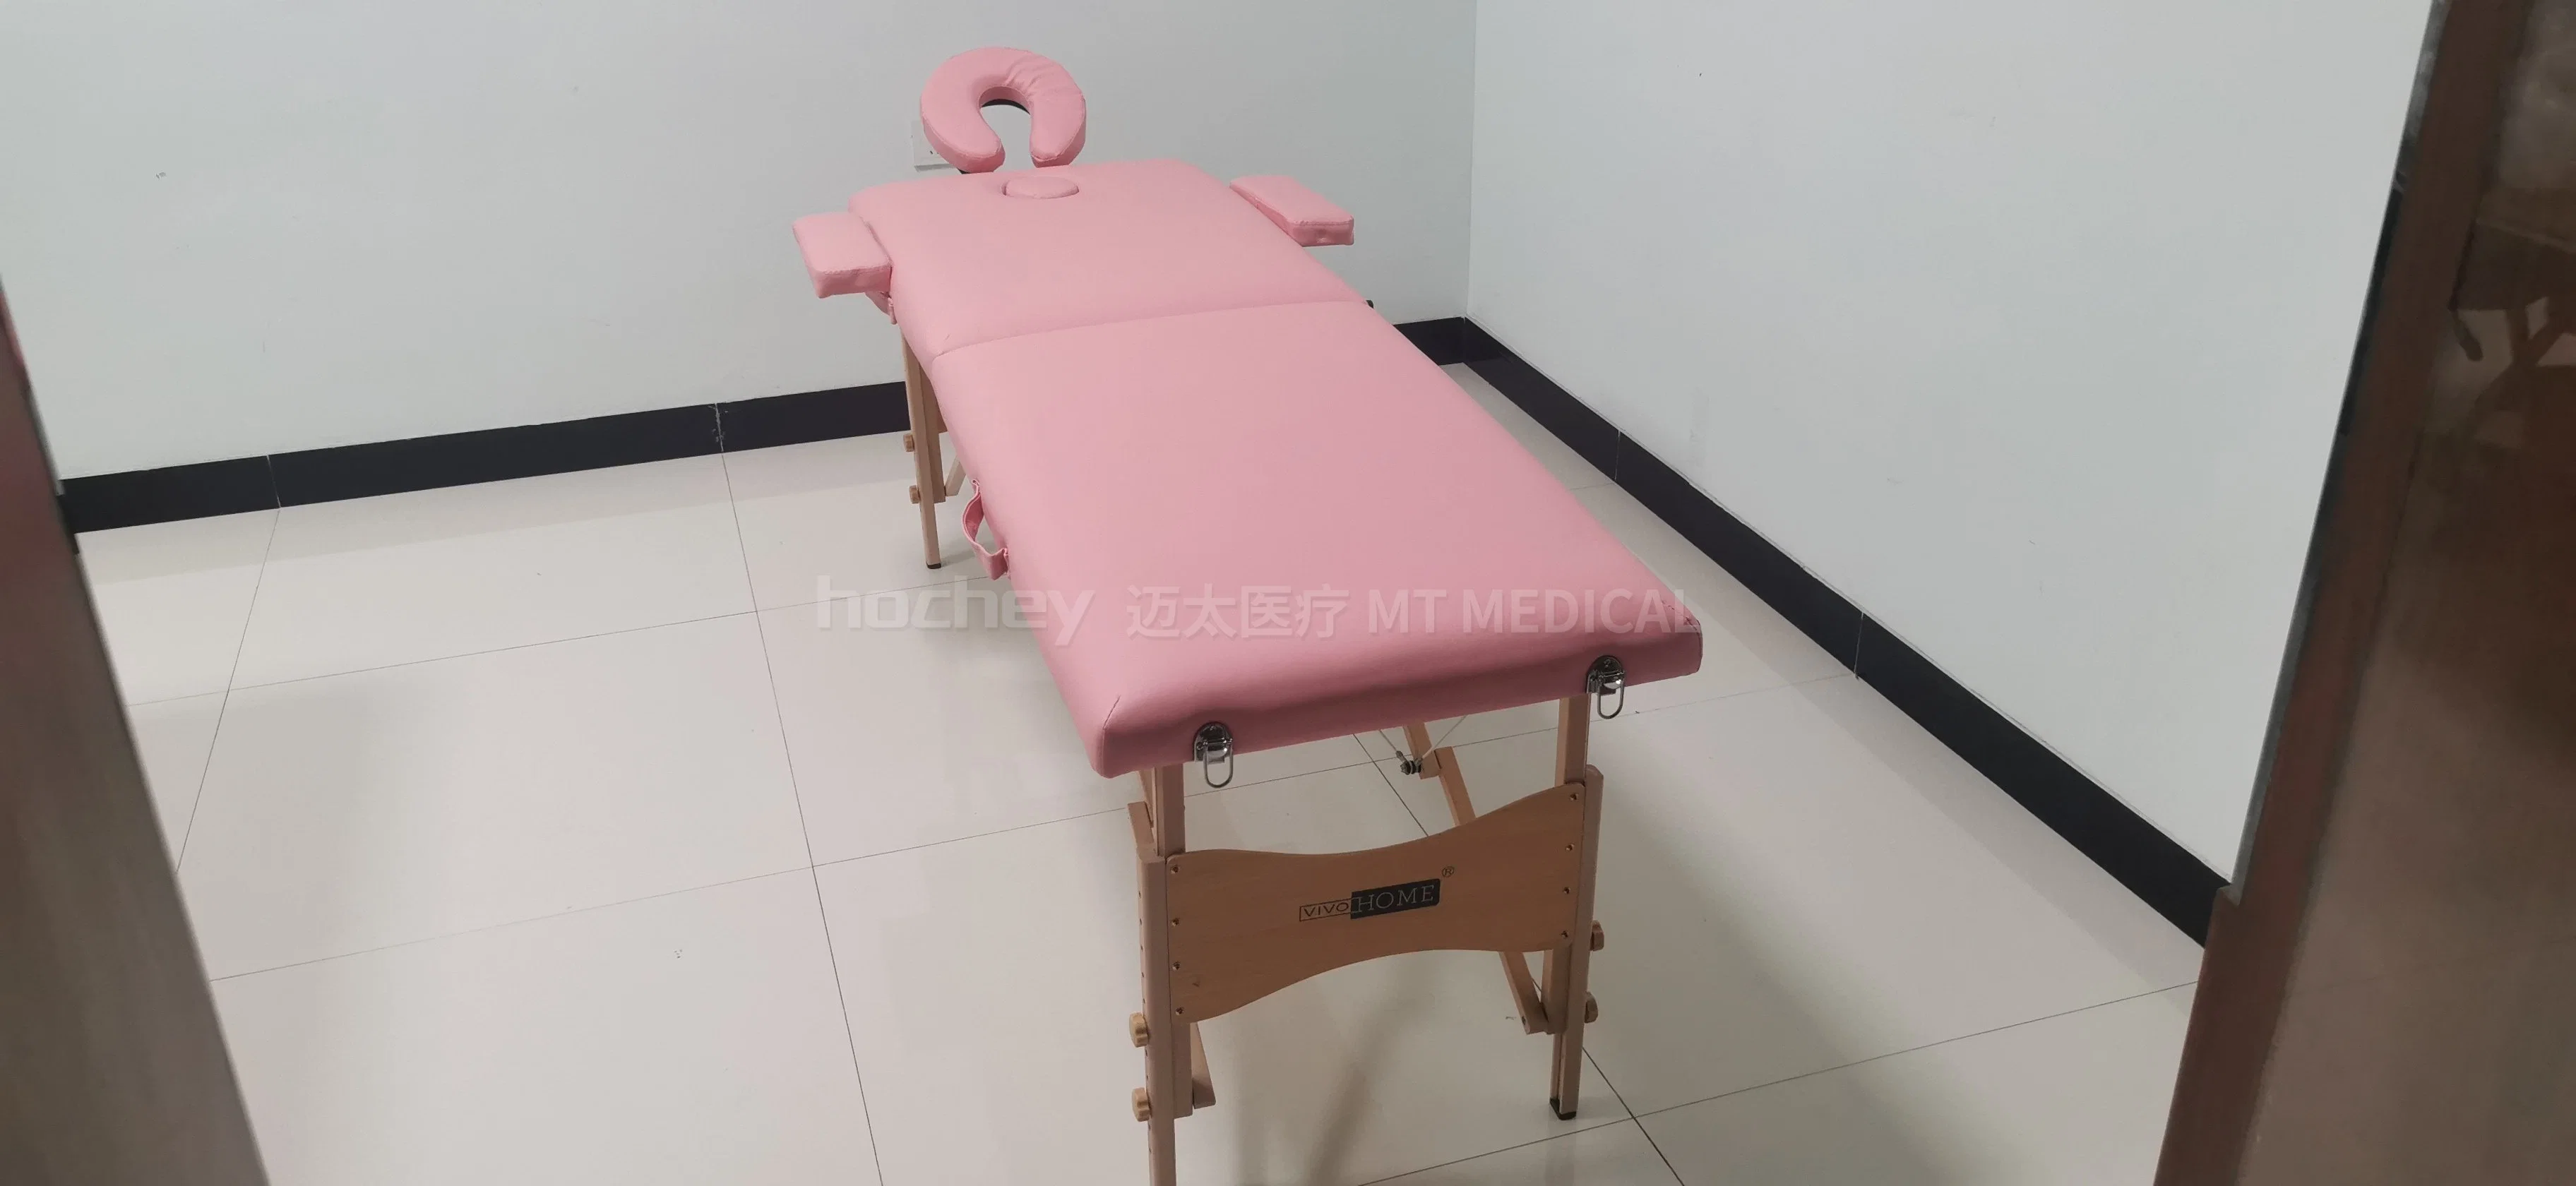 Cheap Folding Portable Acupuncture SPA Bed De Massage Table Adjustable Beauty Salon Facial Bed for Massage with Wooden Leg